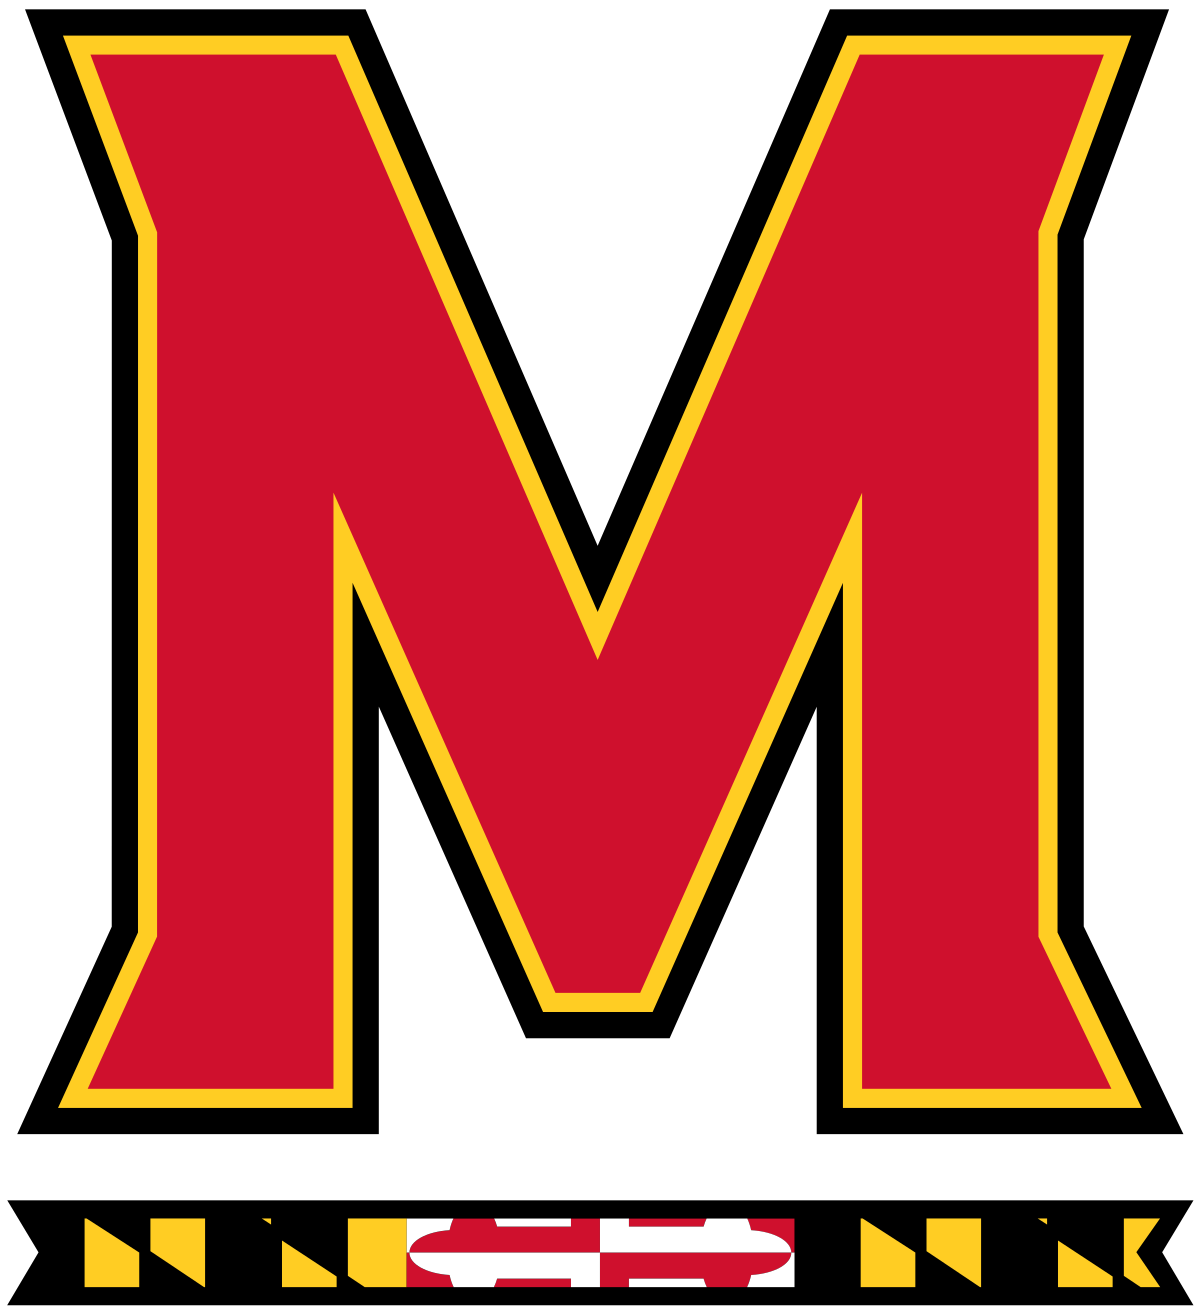 4 inch University of Maryland Terps UM Terrapins Logo Removable Wall Decal Sticker Art NCAA Home Room Decor 4 by 3 1/2 inches